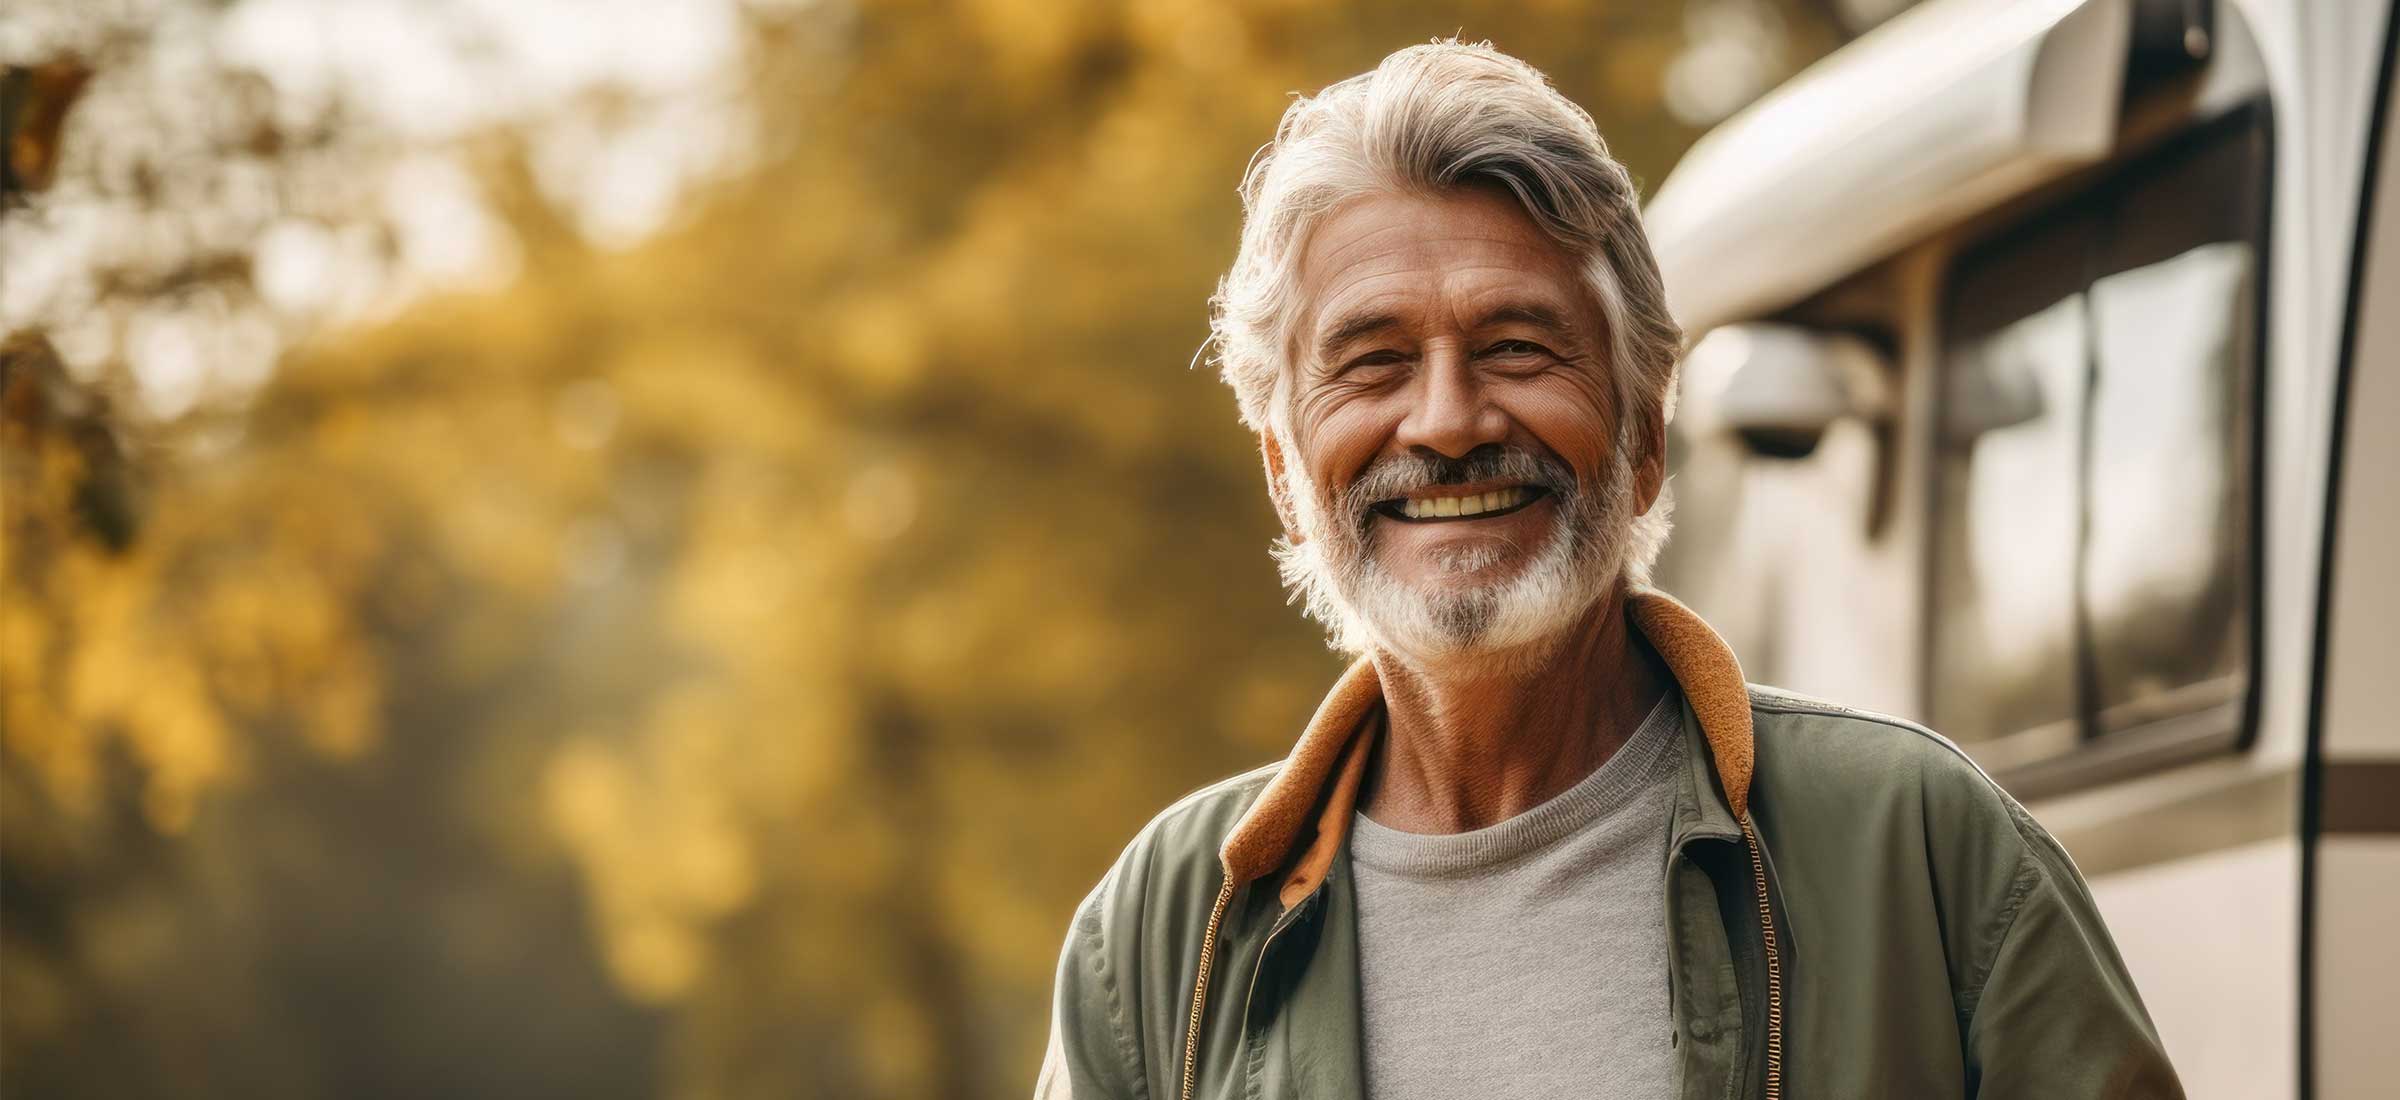 An elderly man smiles in the woods.